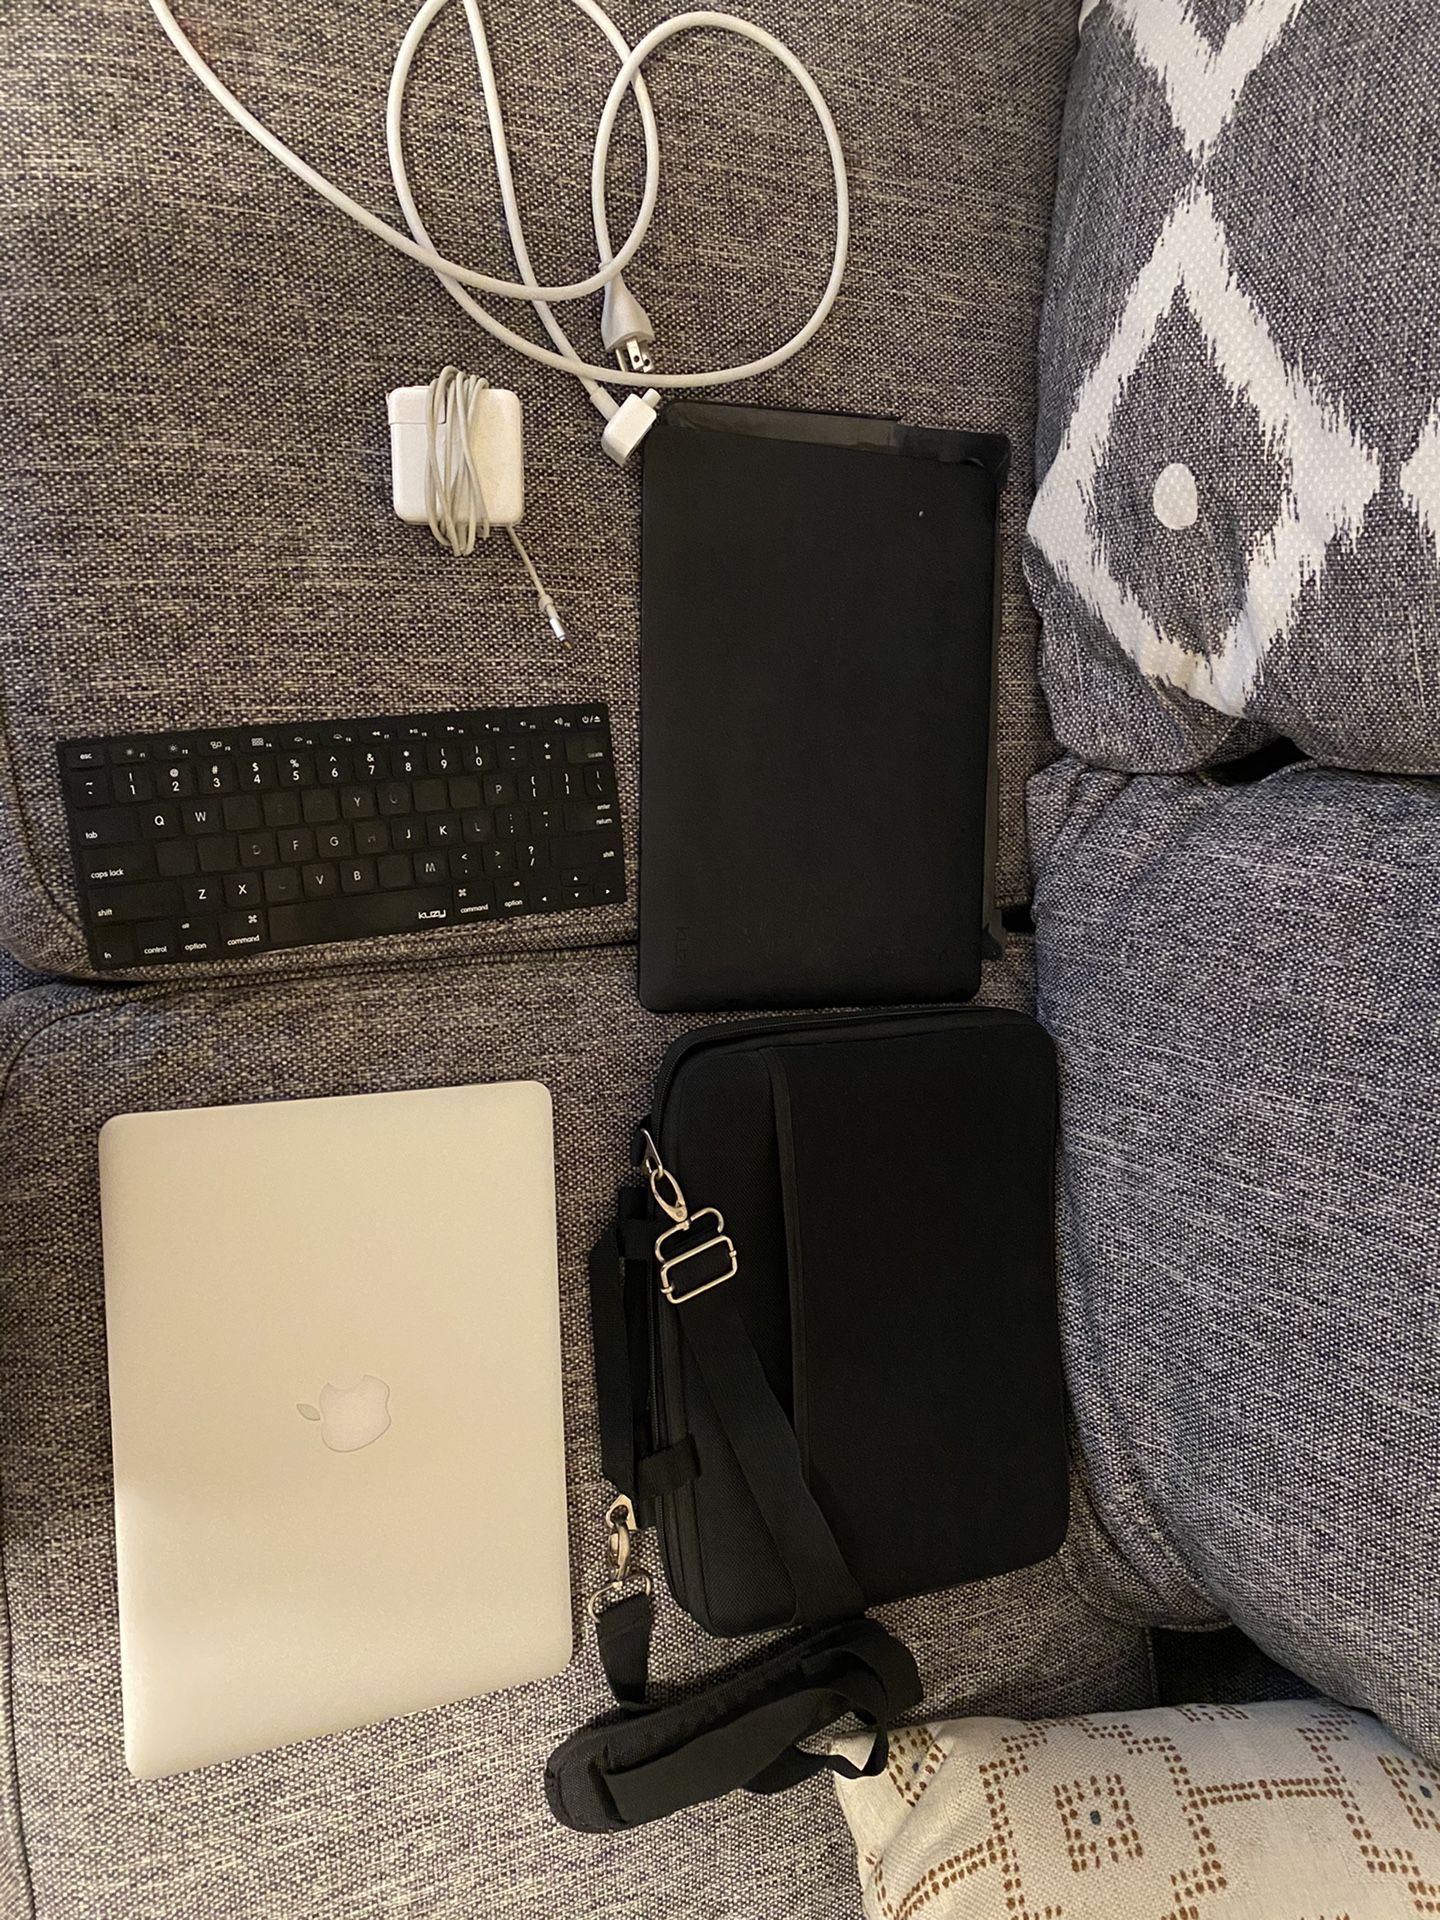 Used 13-inch, Mid 2013 Macbook Air with Accessories